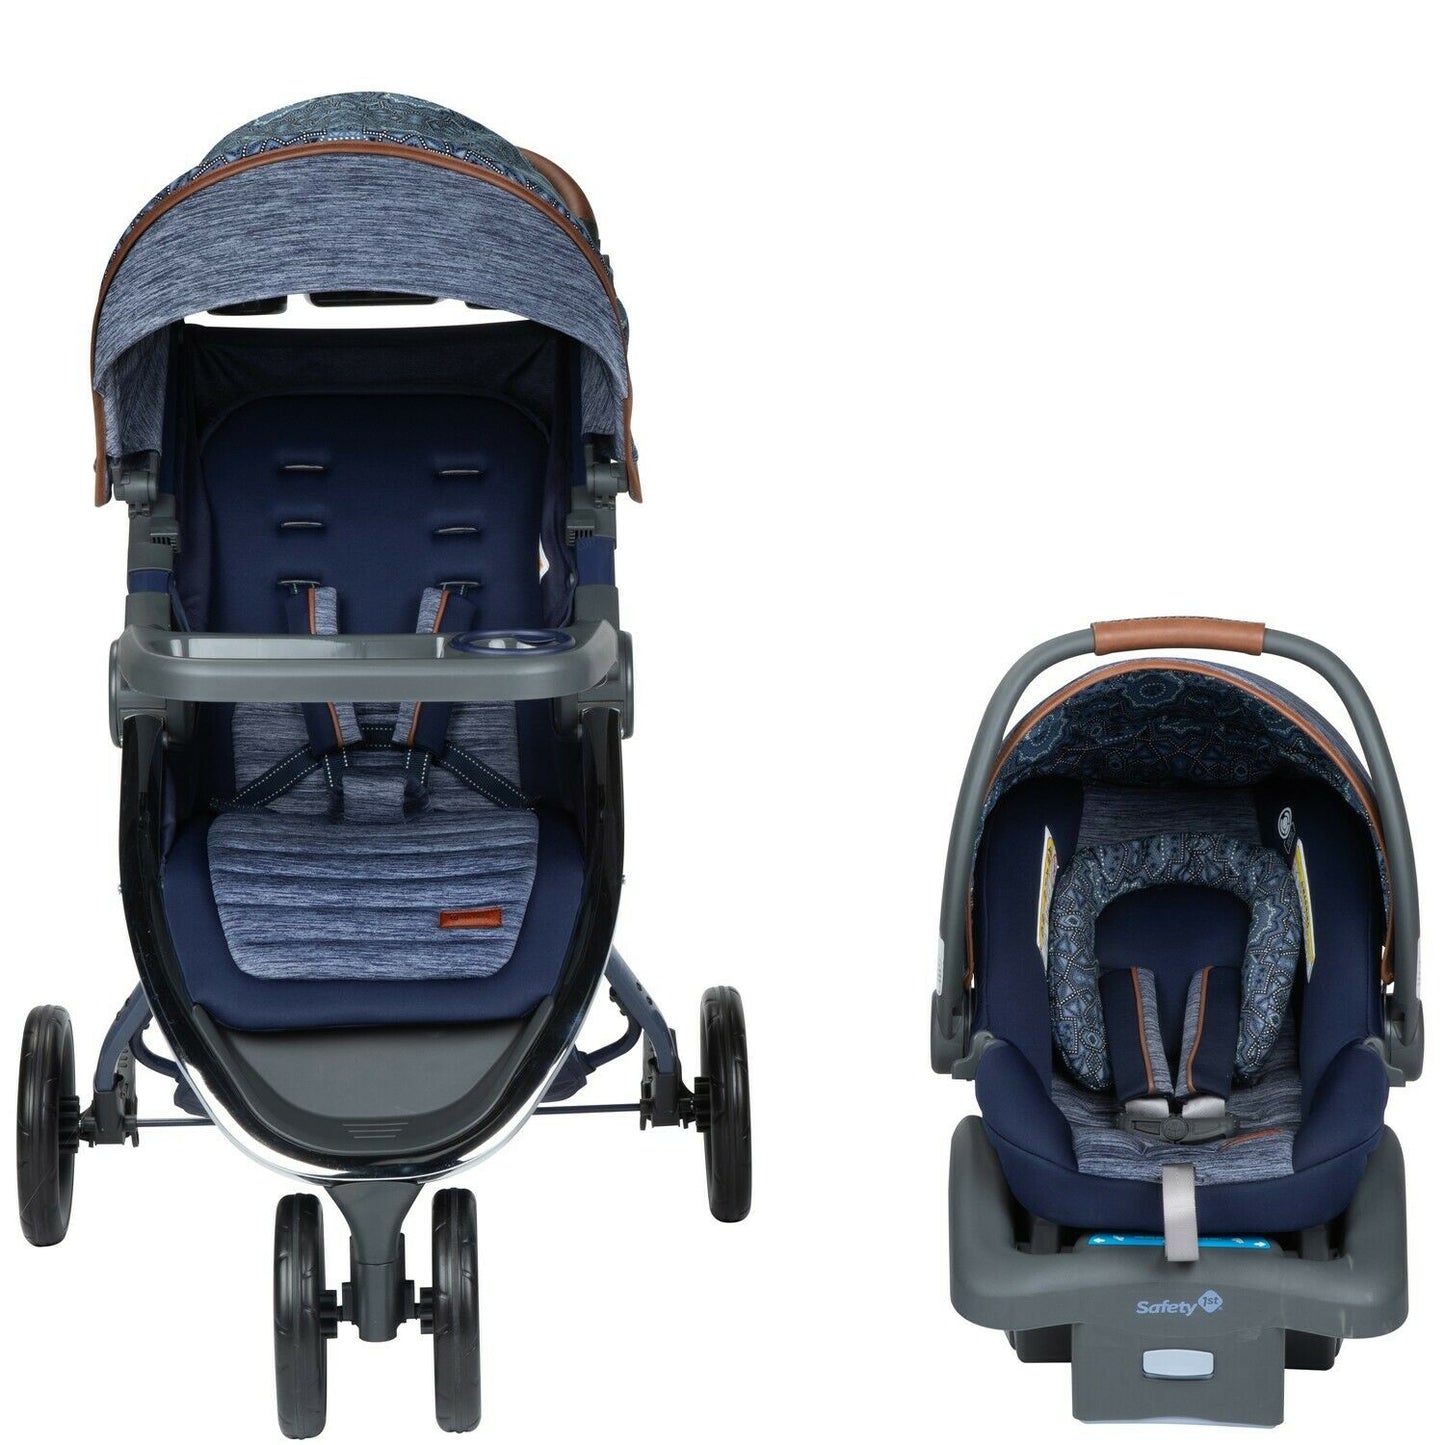 Baby Boy Travel System Stroller with Car Seat Combo Newborn Infant Playard Blue